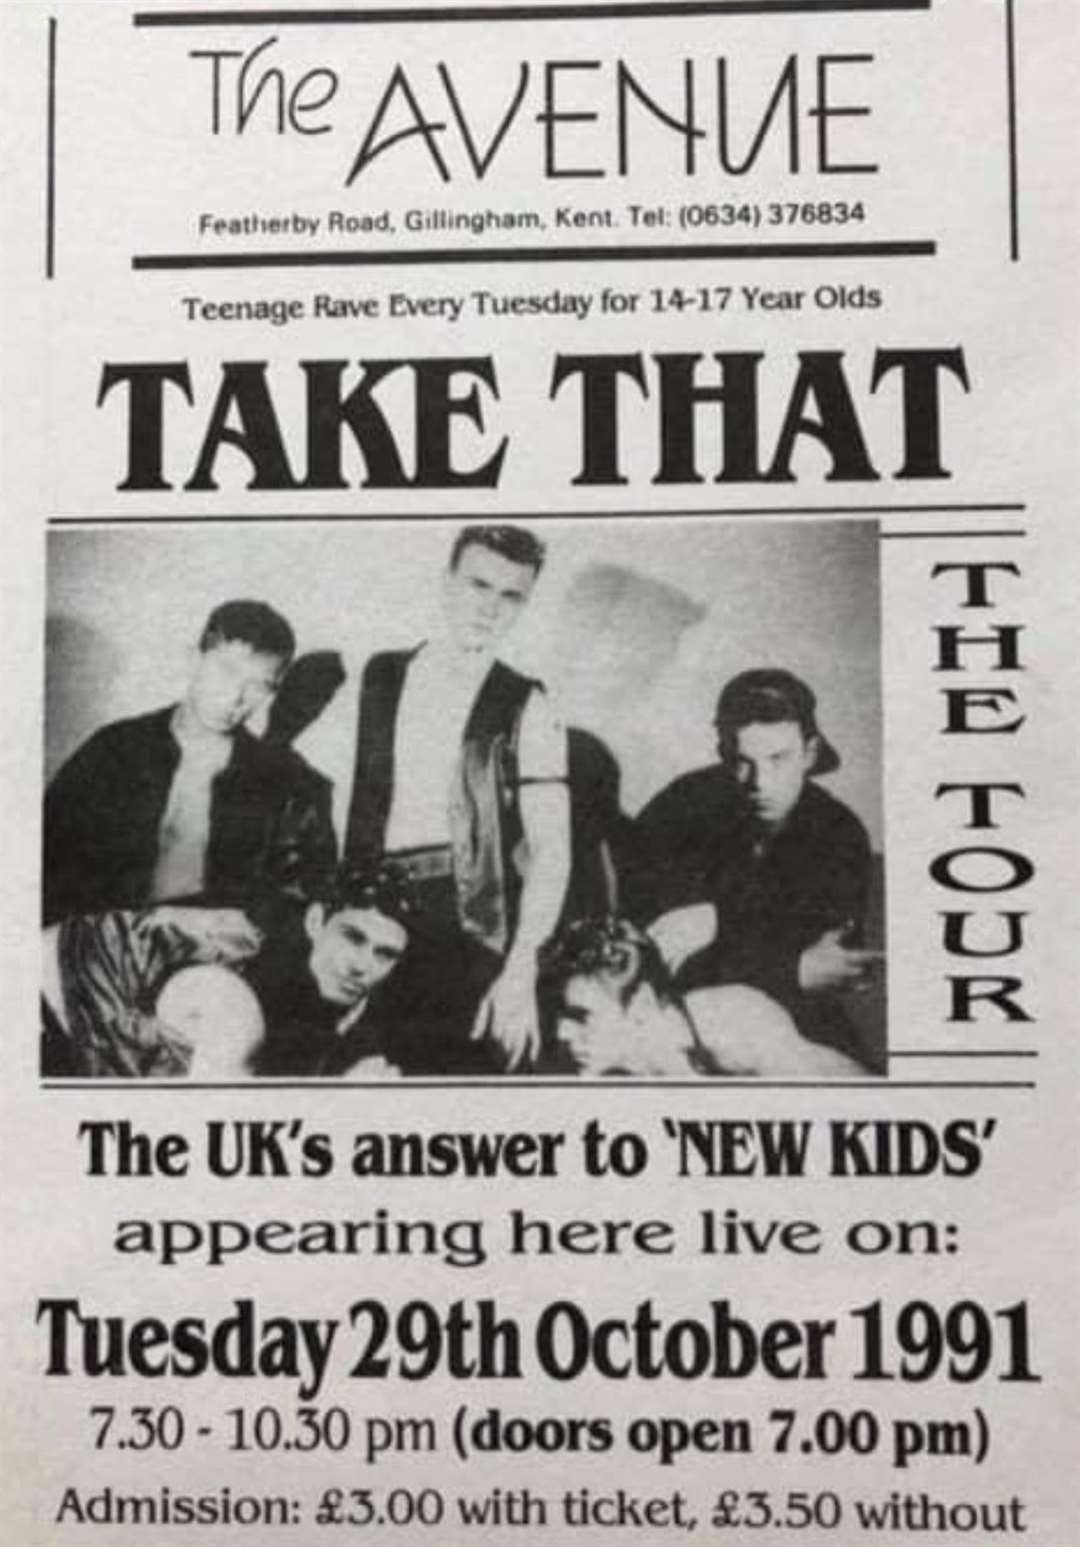 Take That's first gig in Kent was at The Avenue in 1991